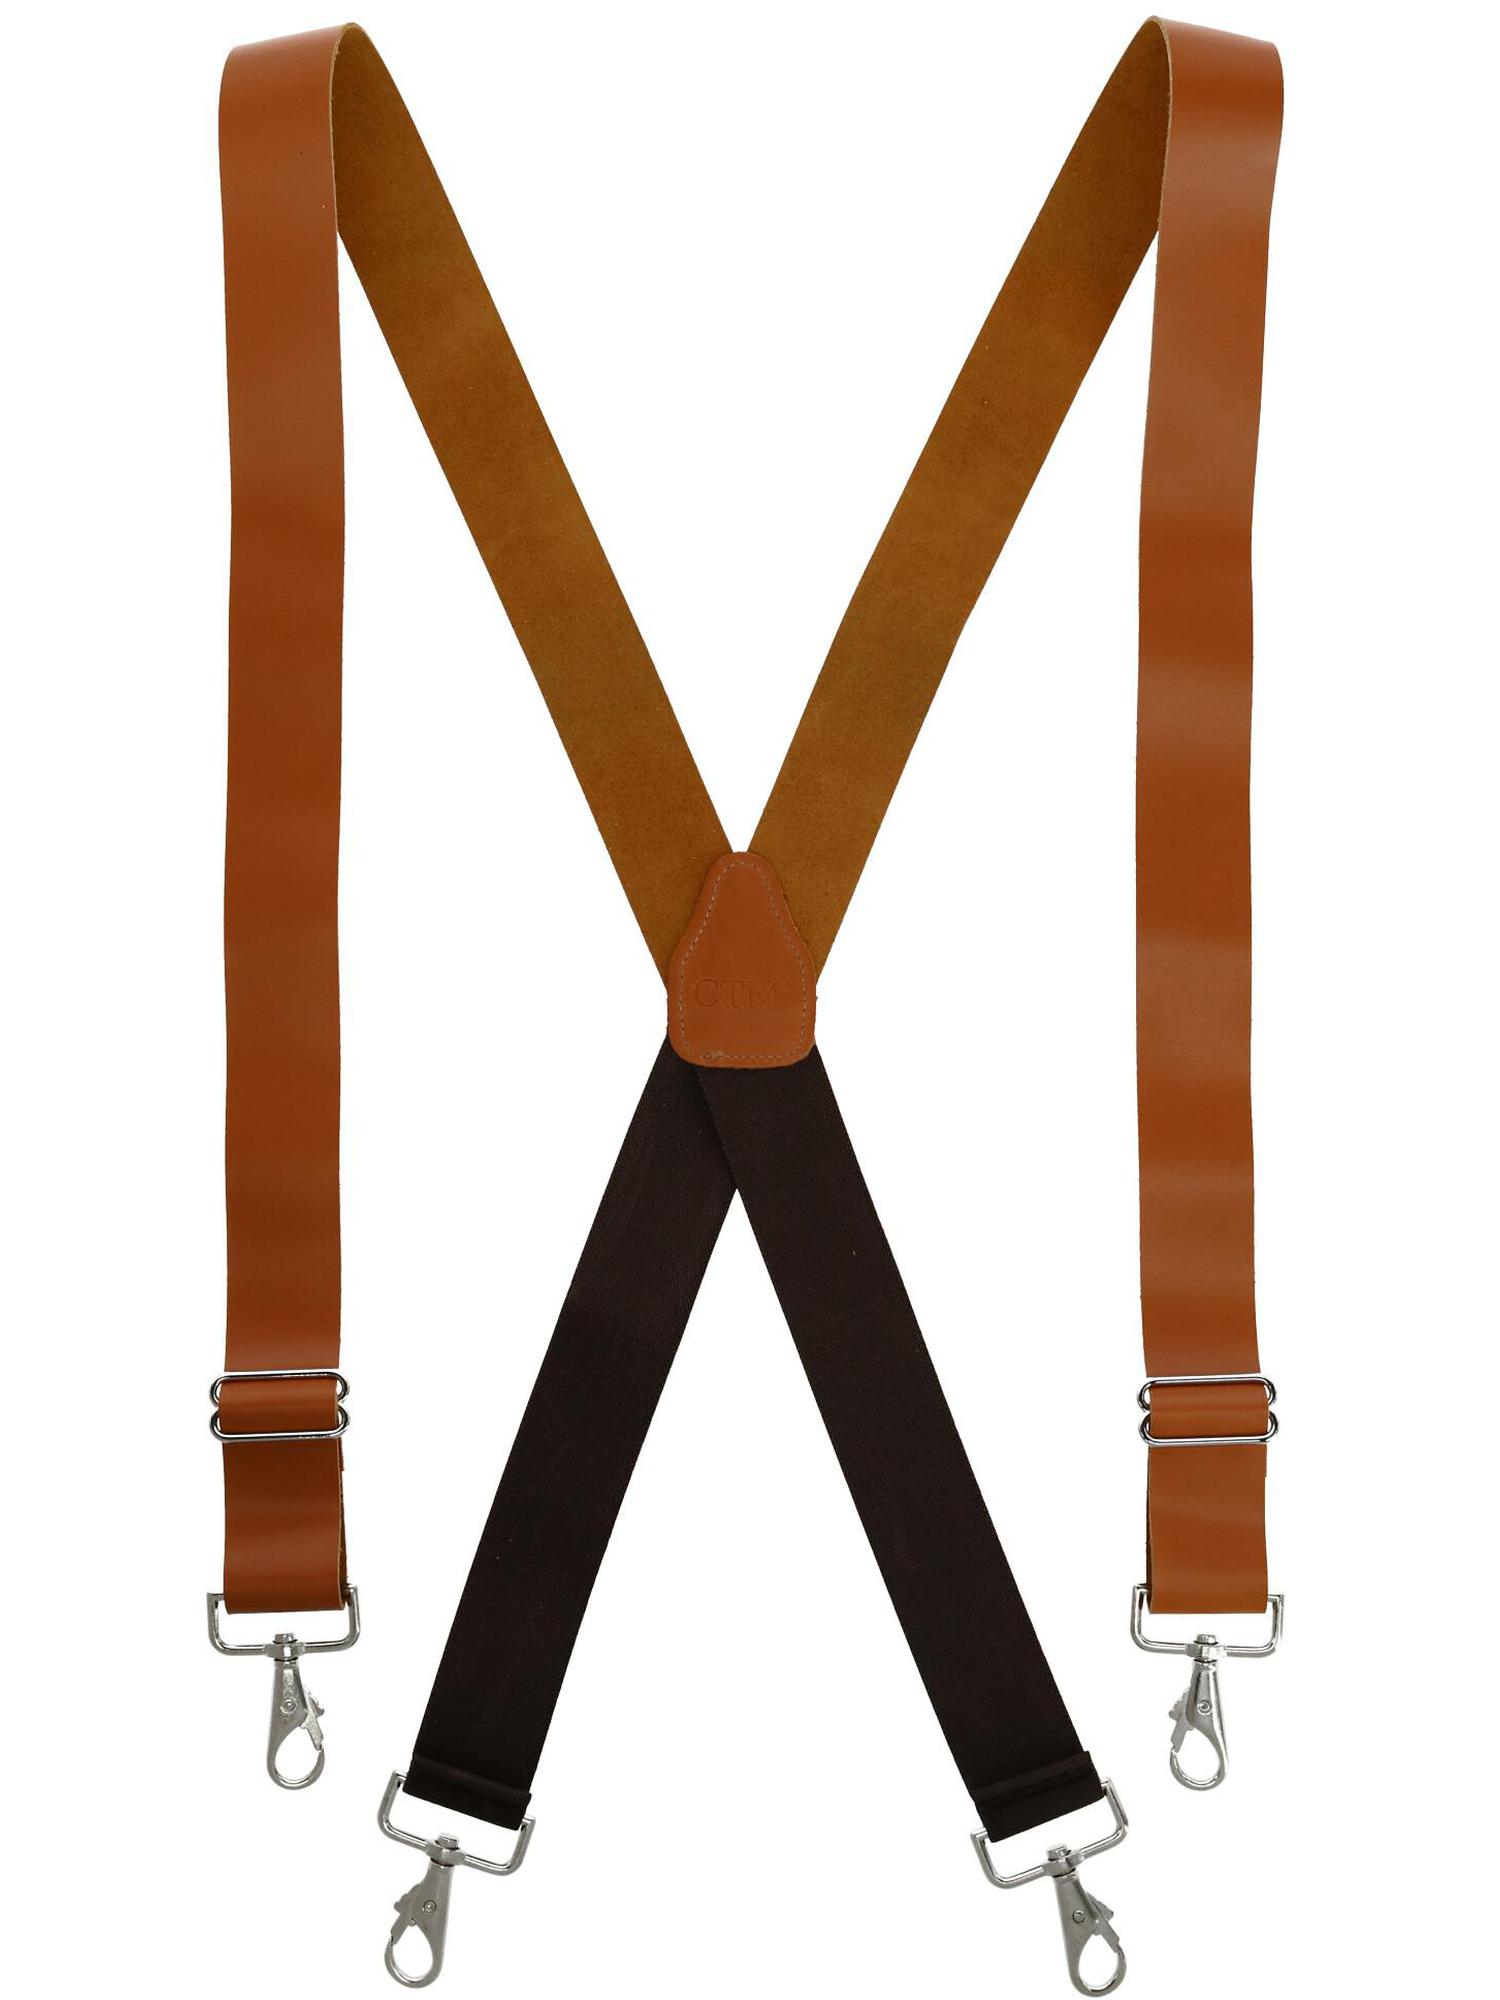 CTM  Smooth Coated Leather Wide Width Suspenders with Metal Swivel Hook Ends - image 1 of 4